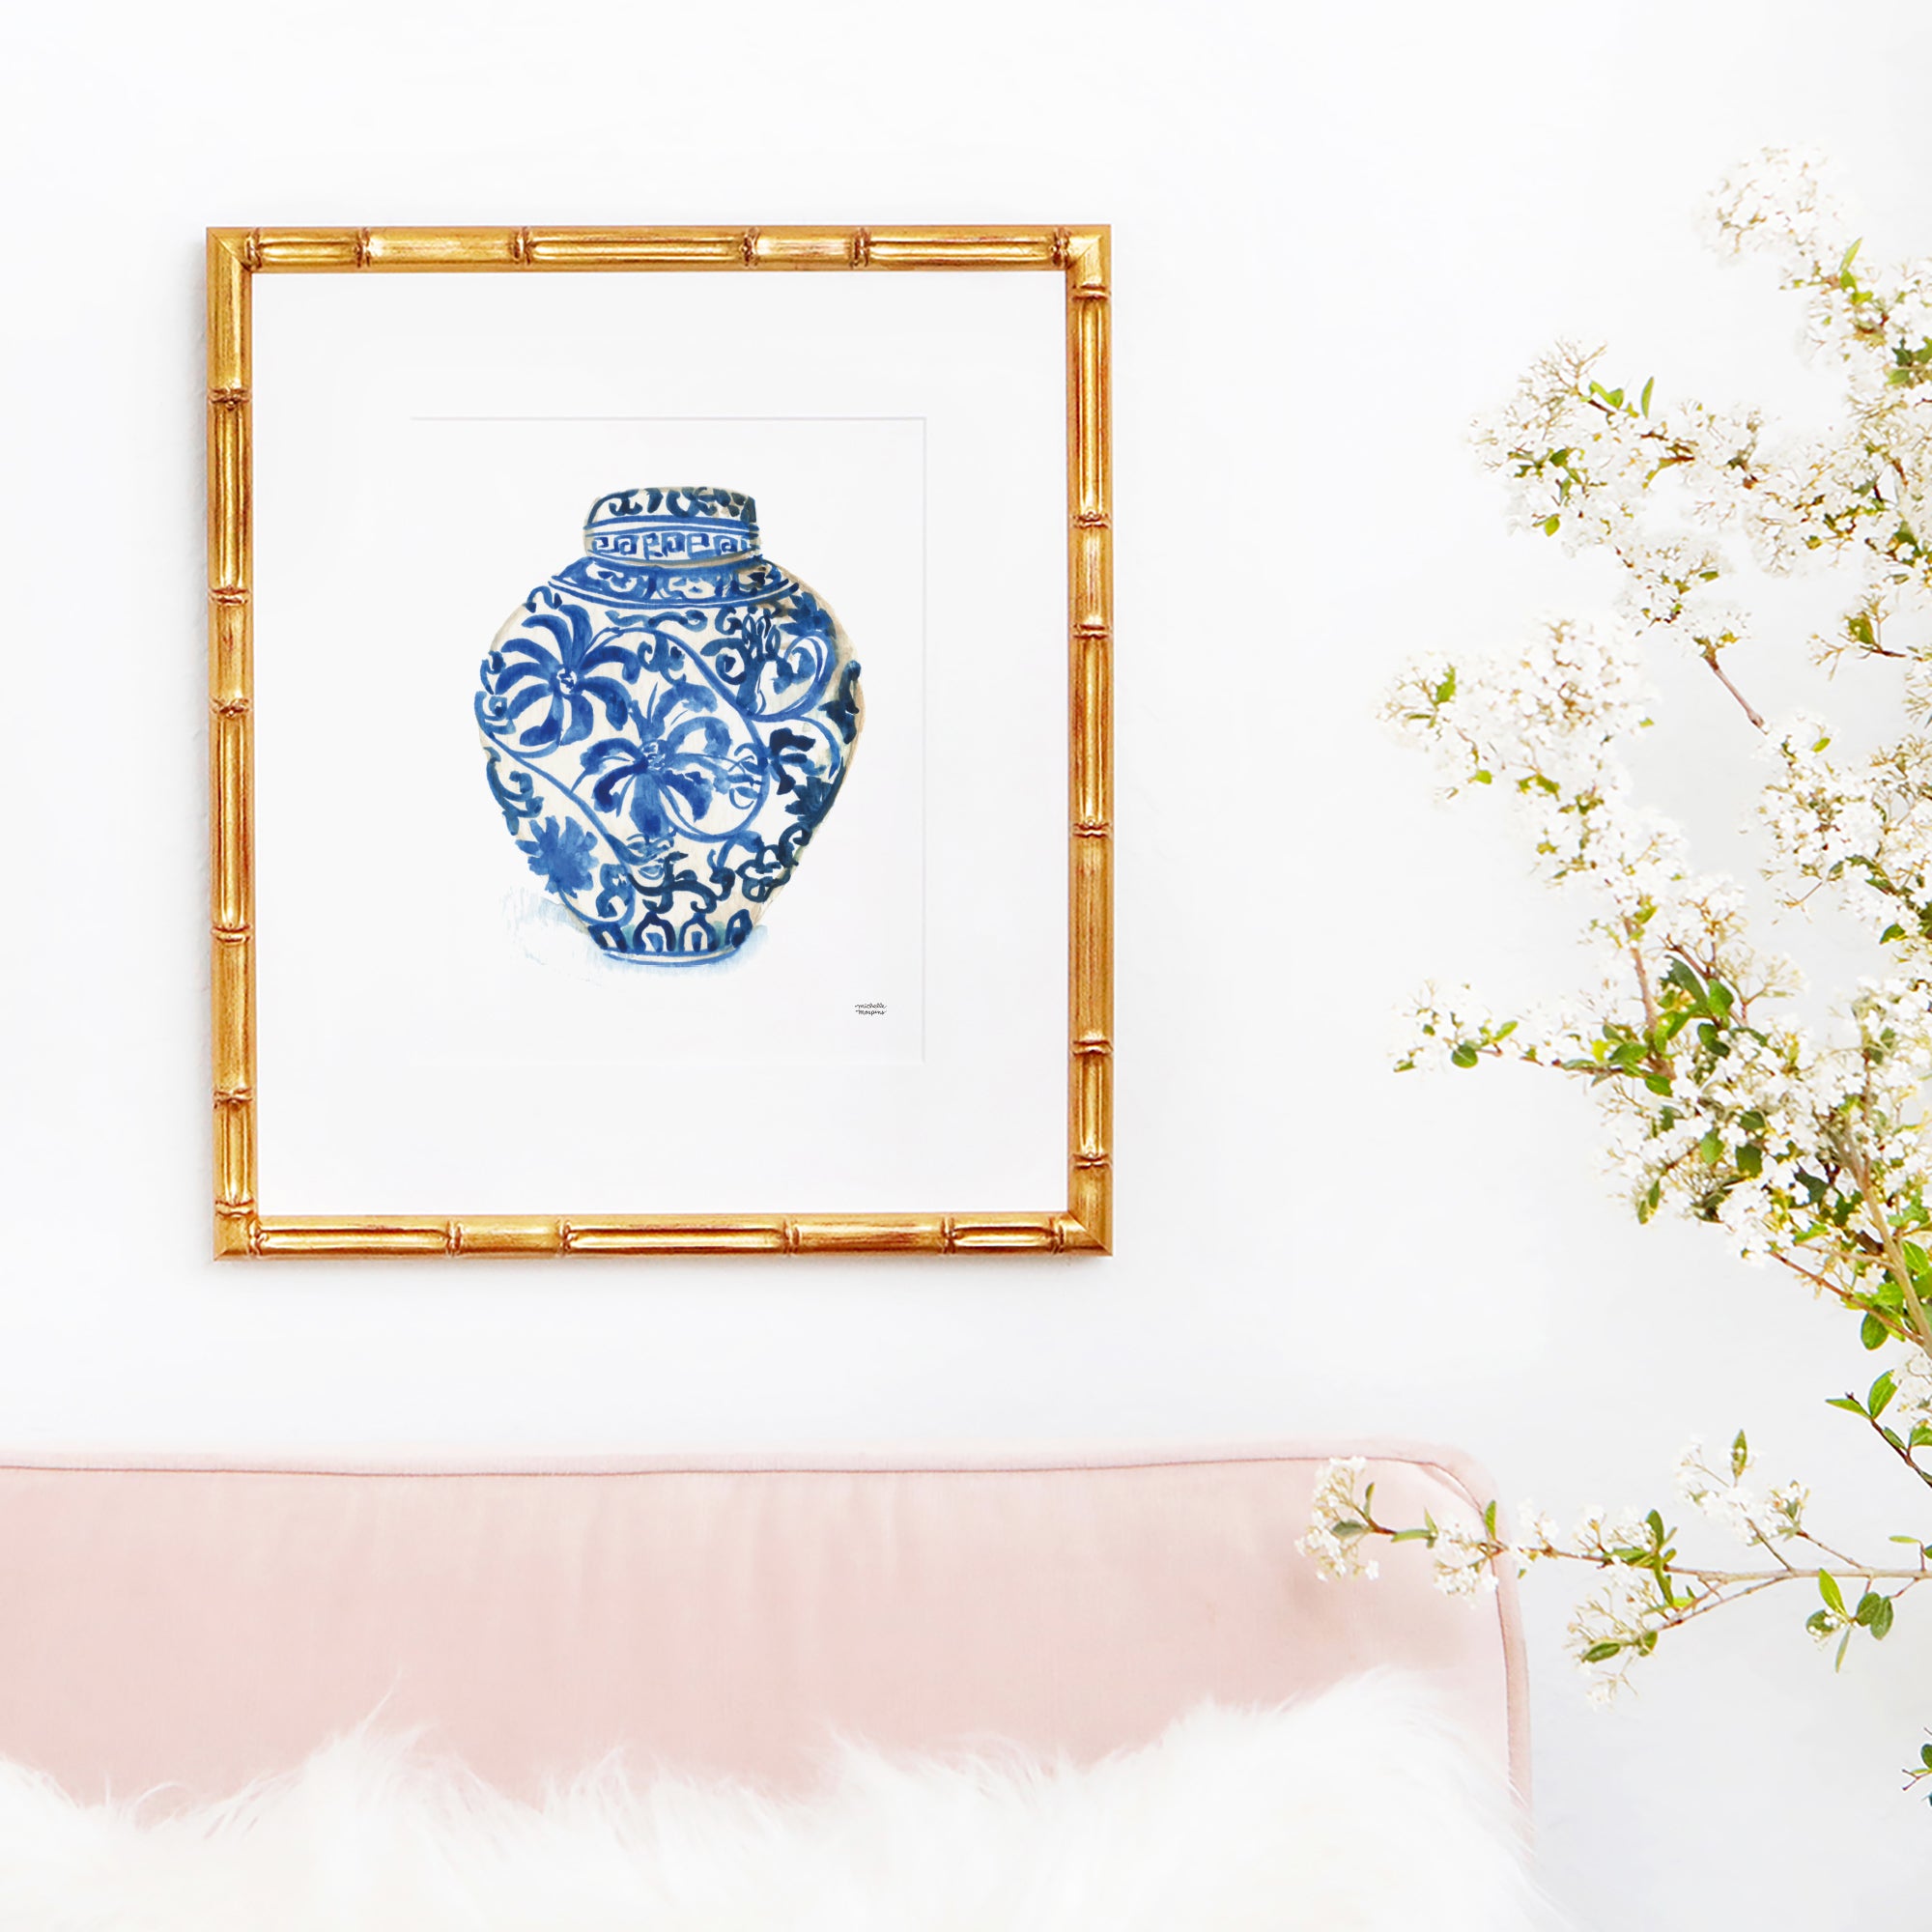 Blue and white vase Ginger Jar No. 3 watercolor painting wall art print by artist Michelle Mospens.